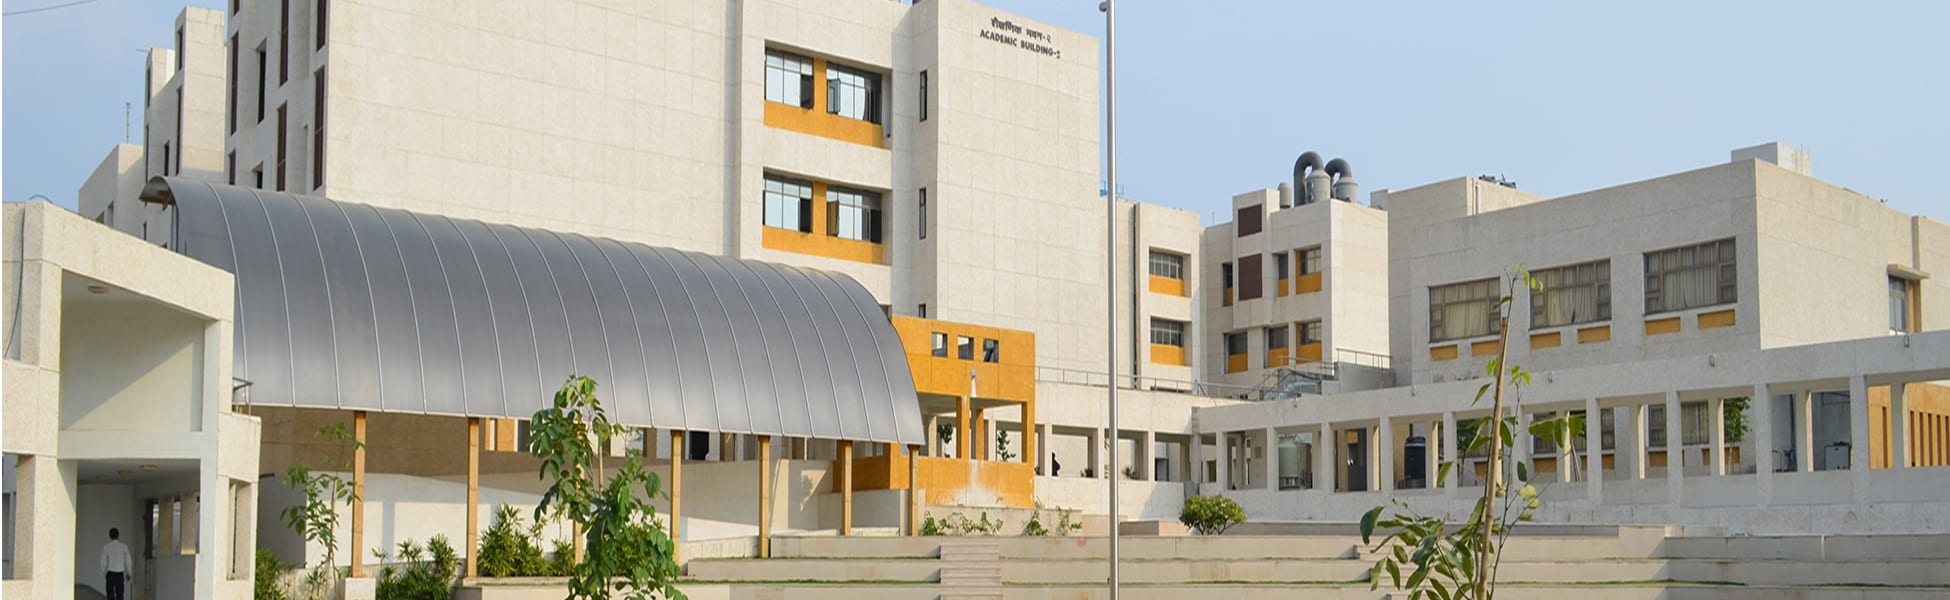 Indian Institute of Science Education and Research (IISER) Bhopal hiring faculty members